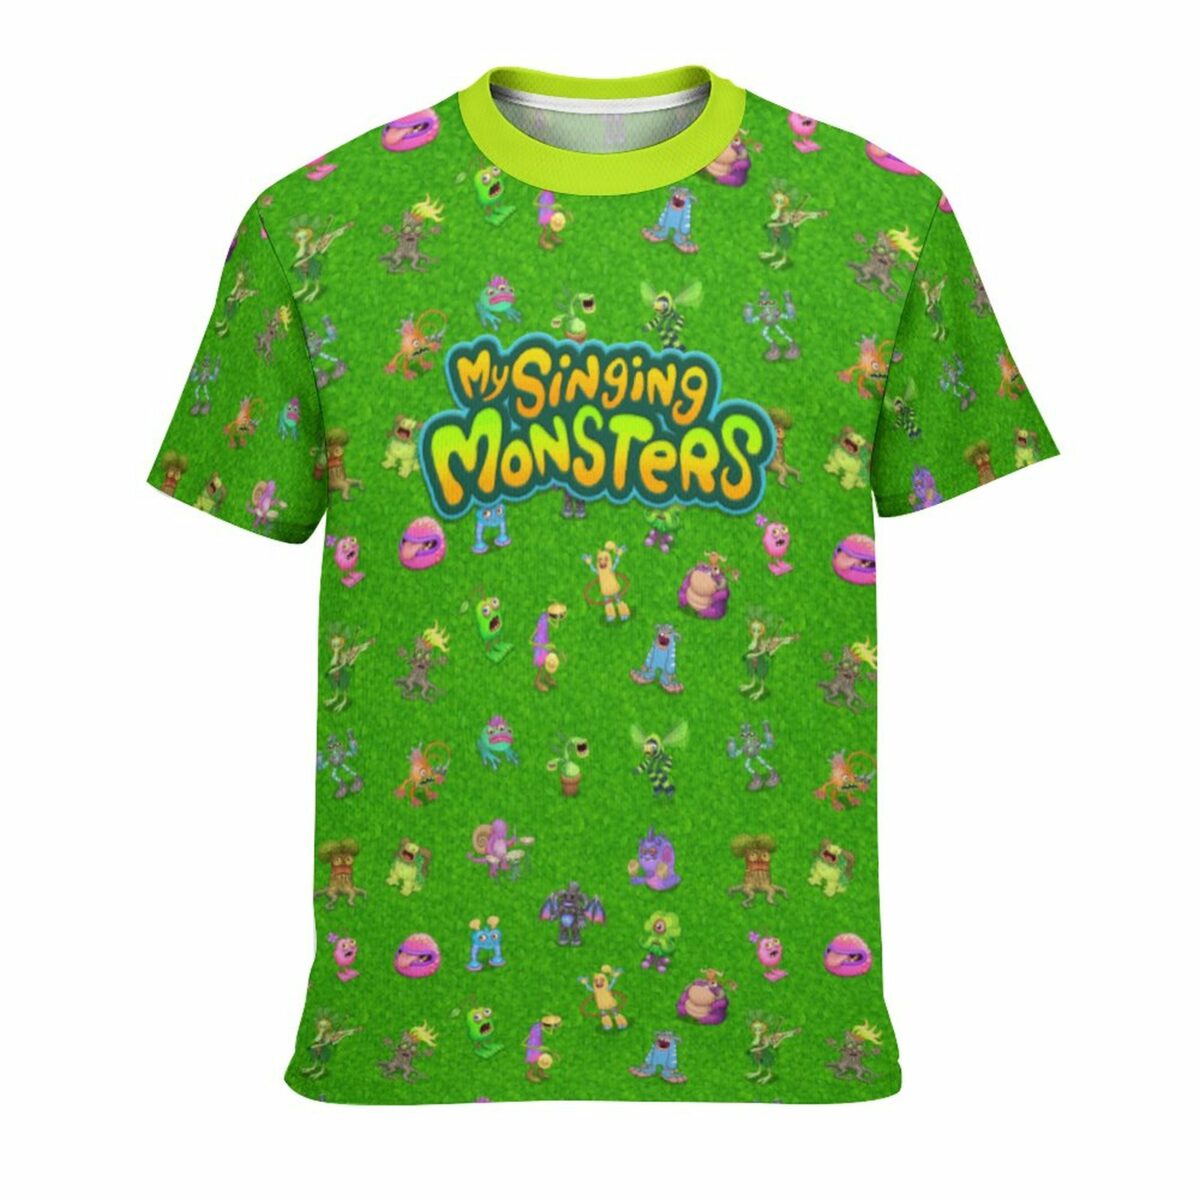 My Singing Monsters T-shirt for Teens (All-Over Printing) Cool Kiddo 10